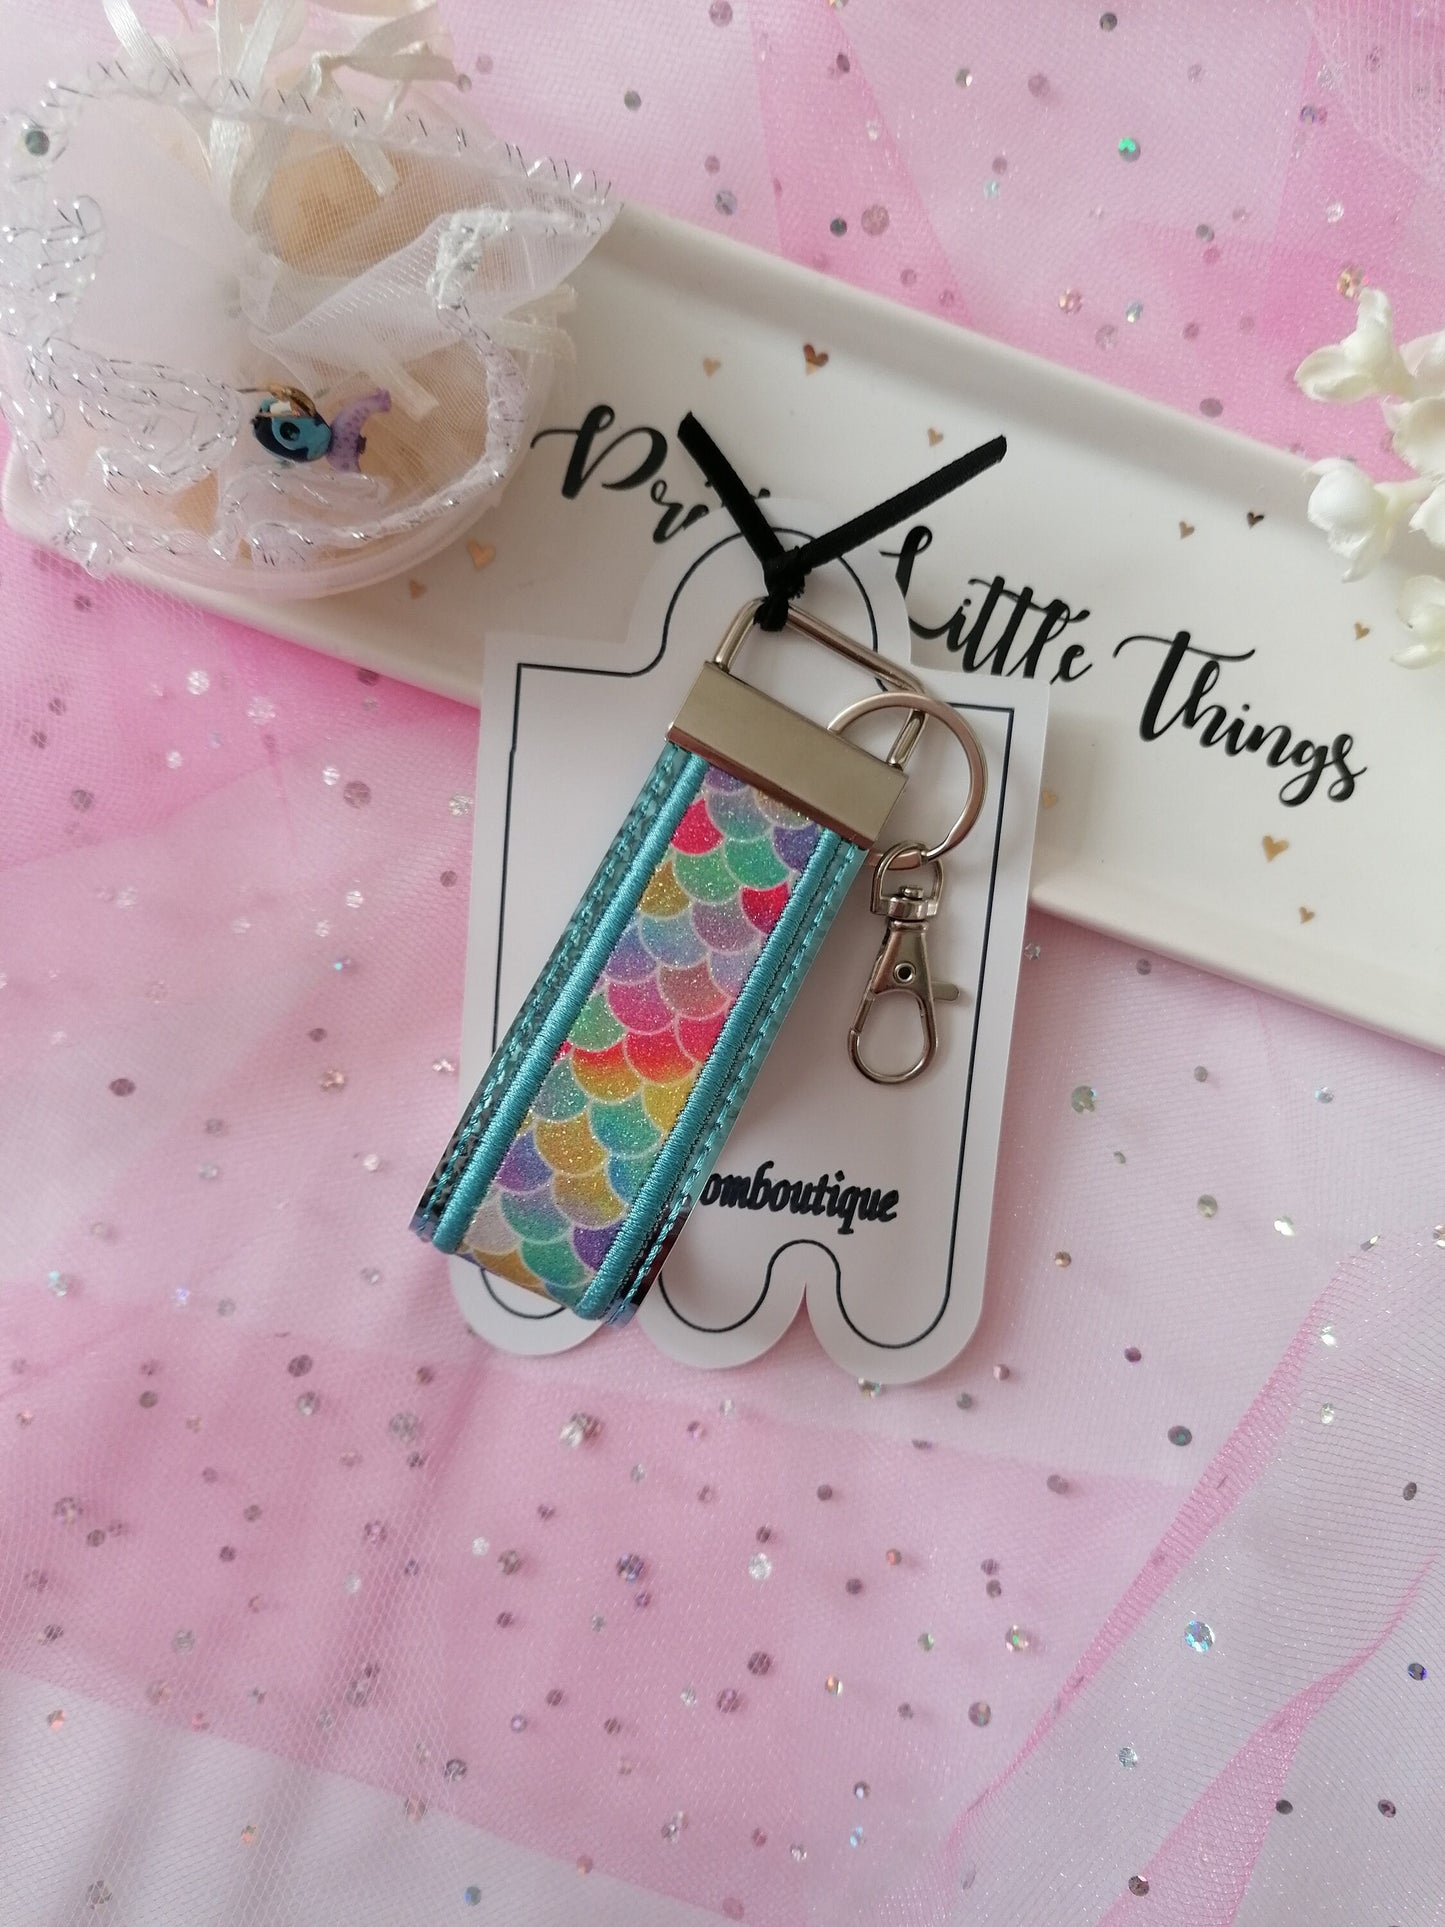 Embroidered Blue Key Fob Wristlet, Holographic Key Fob,Mermaid Design, Embroidered Key Chain, Embroidered Key Fob, Wristlet Key Chain